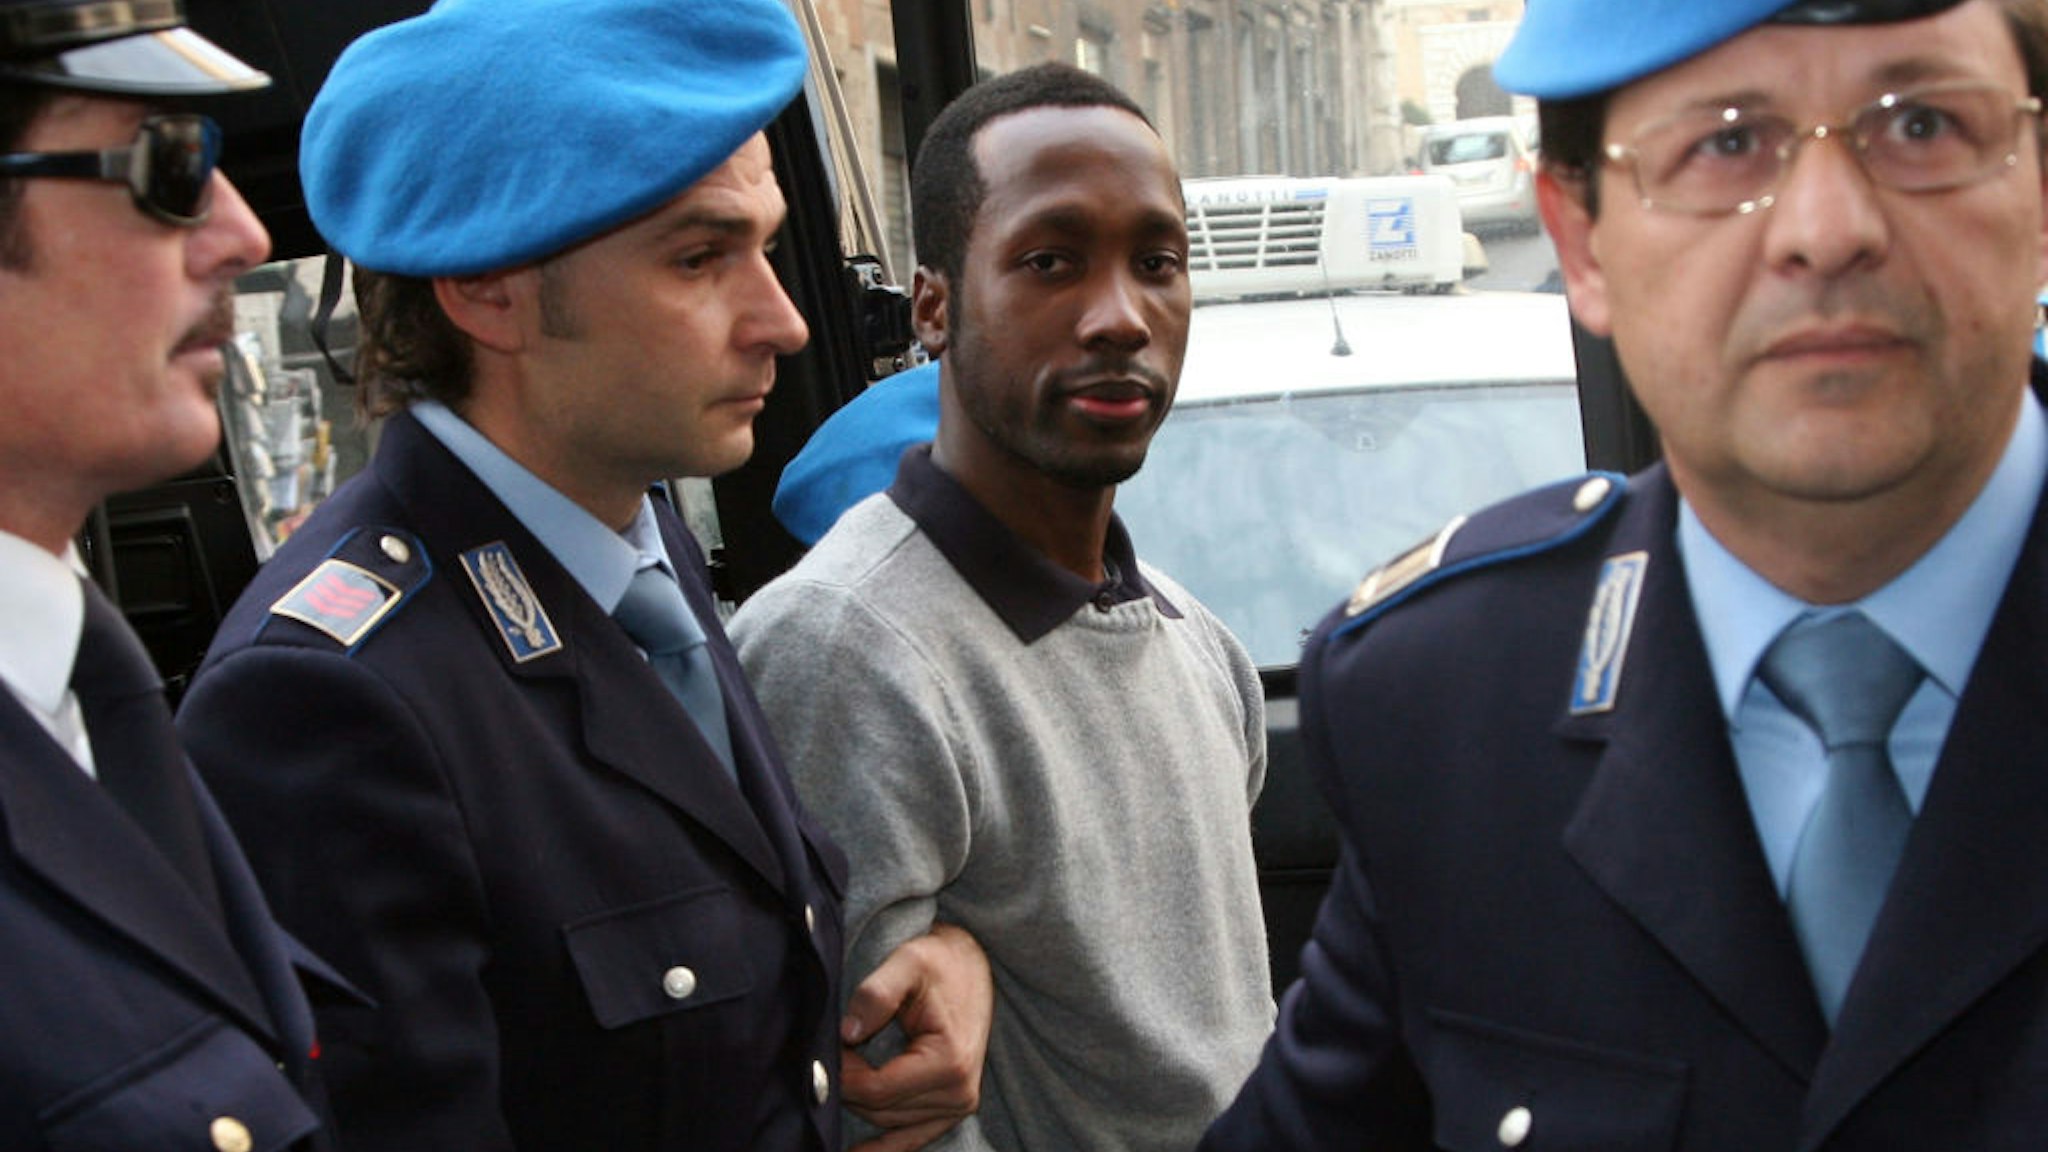 Ivory Coast man Rudy Guede arrives at the Perugia courthouse for the sitting of his appeal against the sentence he received in the Meredith Kercher murder trial, on November 18, 2009 in Perugia, Italy.